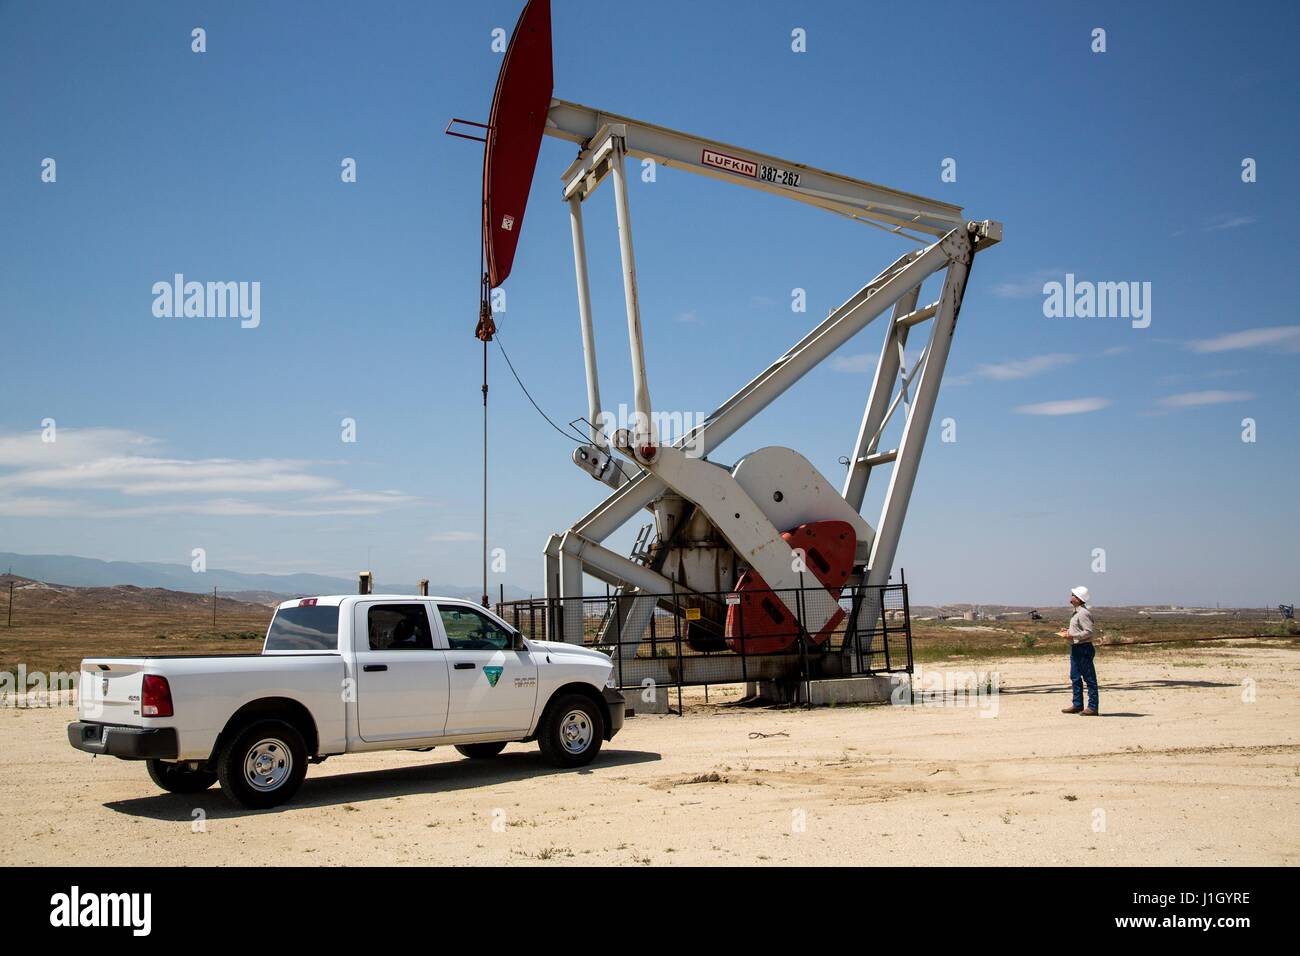 A federal Bureau of Land Management team inspects pump jacks in the Kern River Oil Field along the San Joaquin Valley April 11, 2017 in Bakersfield, California. The oil and gas wells that cover the area are on public land leased by the federal government to private industry. Stock Photo